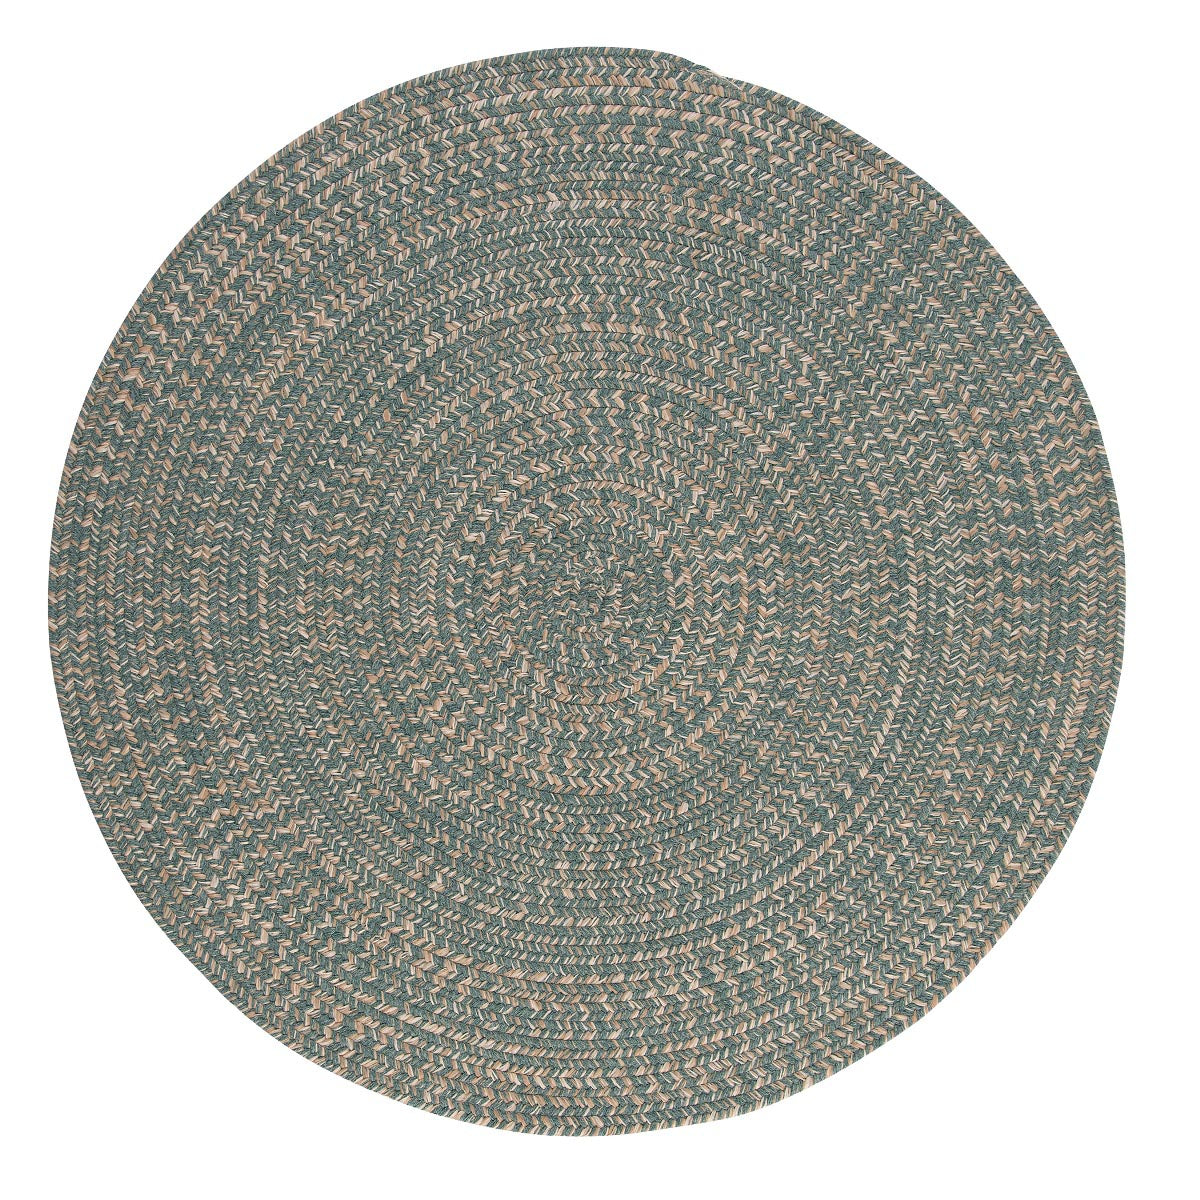 Tremont Teal Outdoor Braided Round Rugs